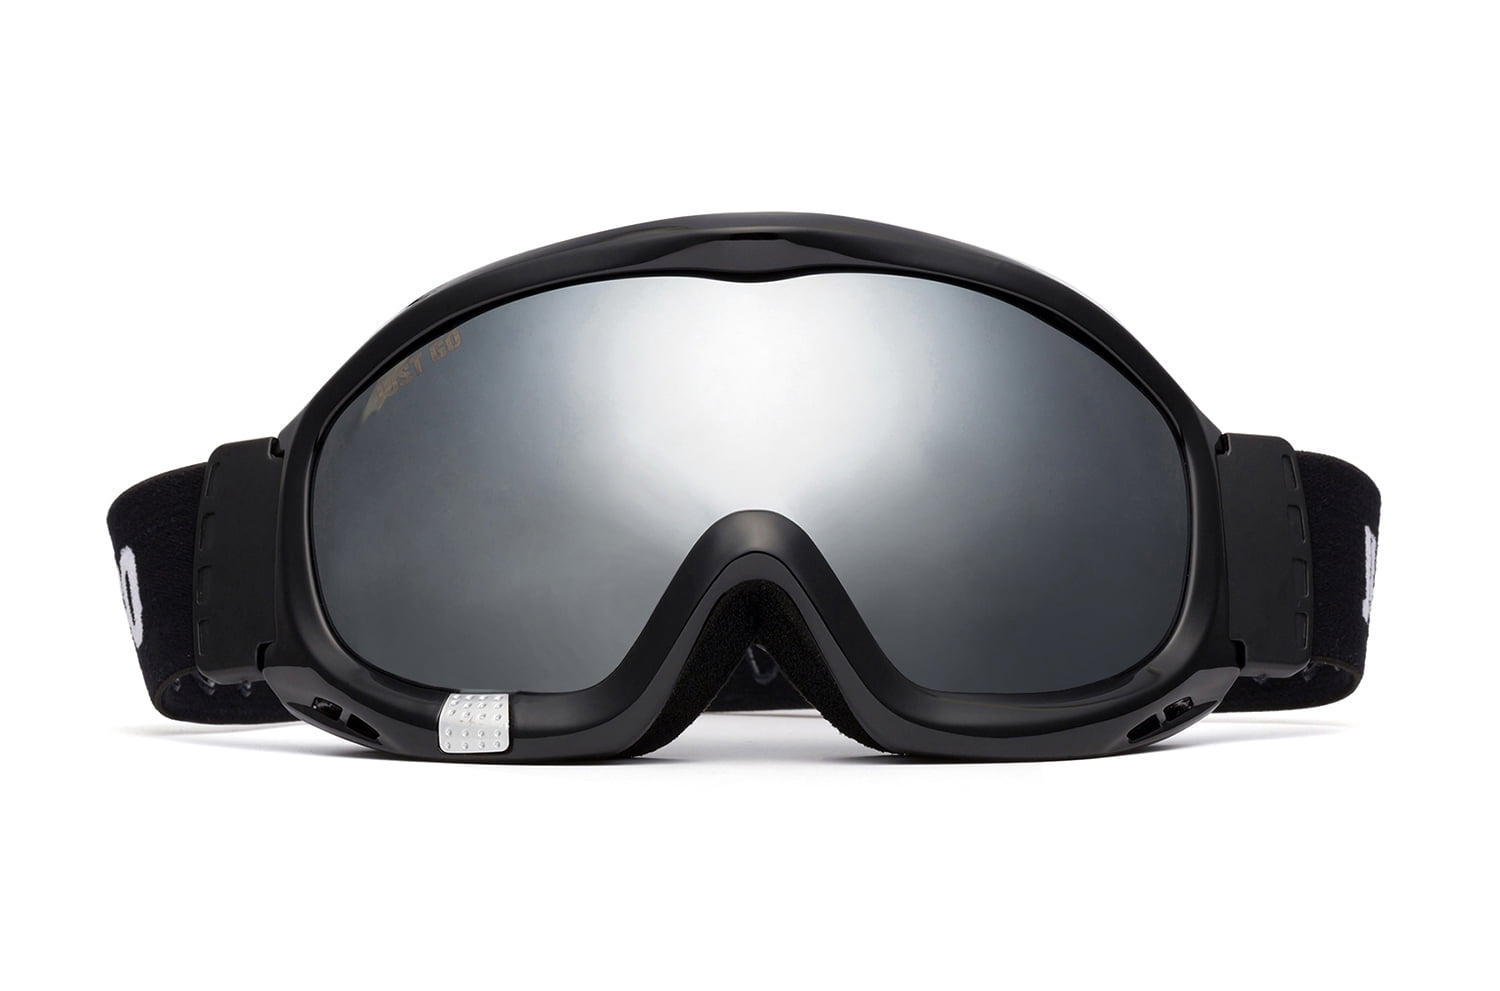 JUST GO Ski Goggles for Skiing Motorcycling and Winter Sports Dual-Layer Anti-Fog 100% UV Protection lens Snowboard fit Men, Women and Youth, Black Frame/ Silver Lens (VTL 12.8%) - Walmart.com